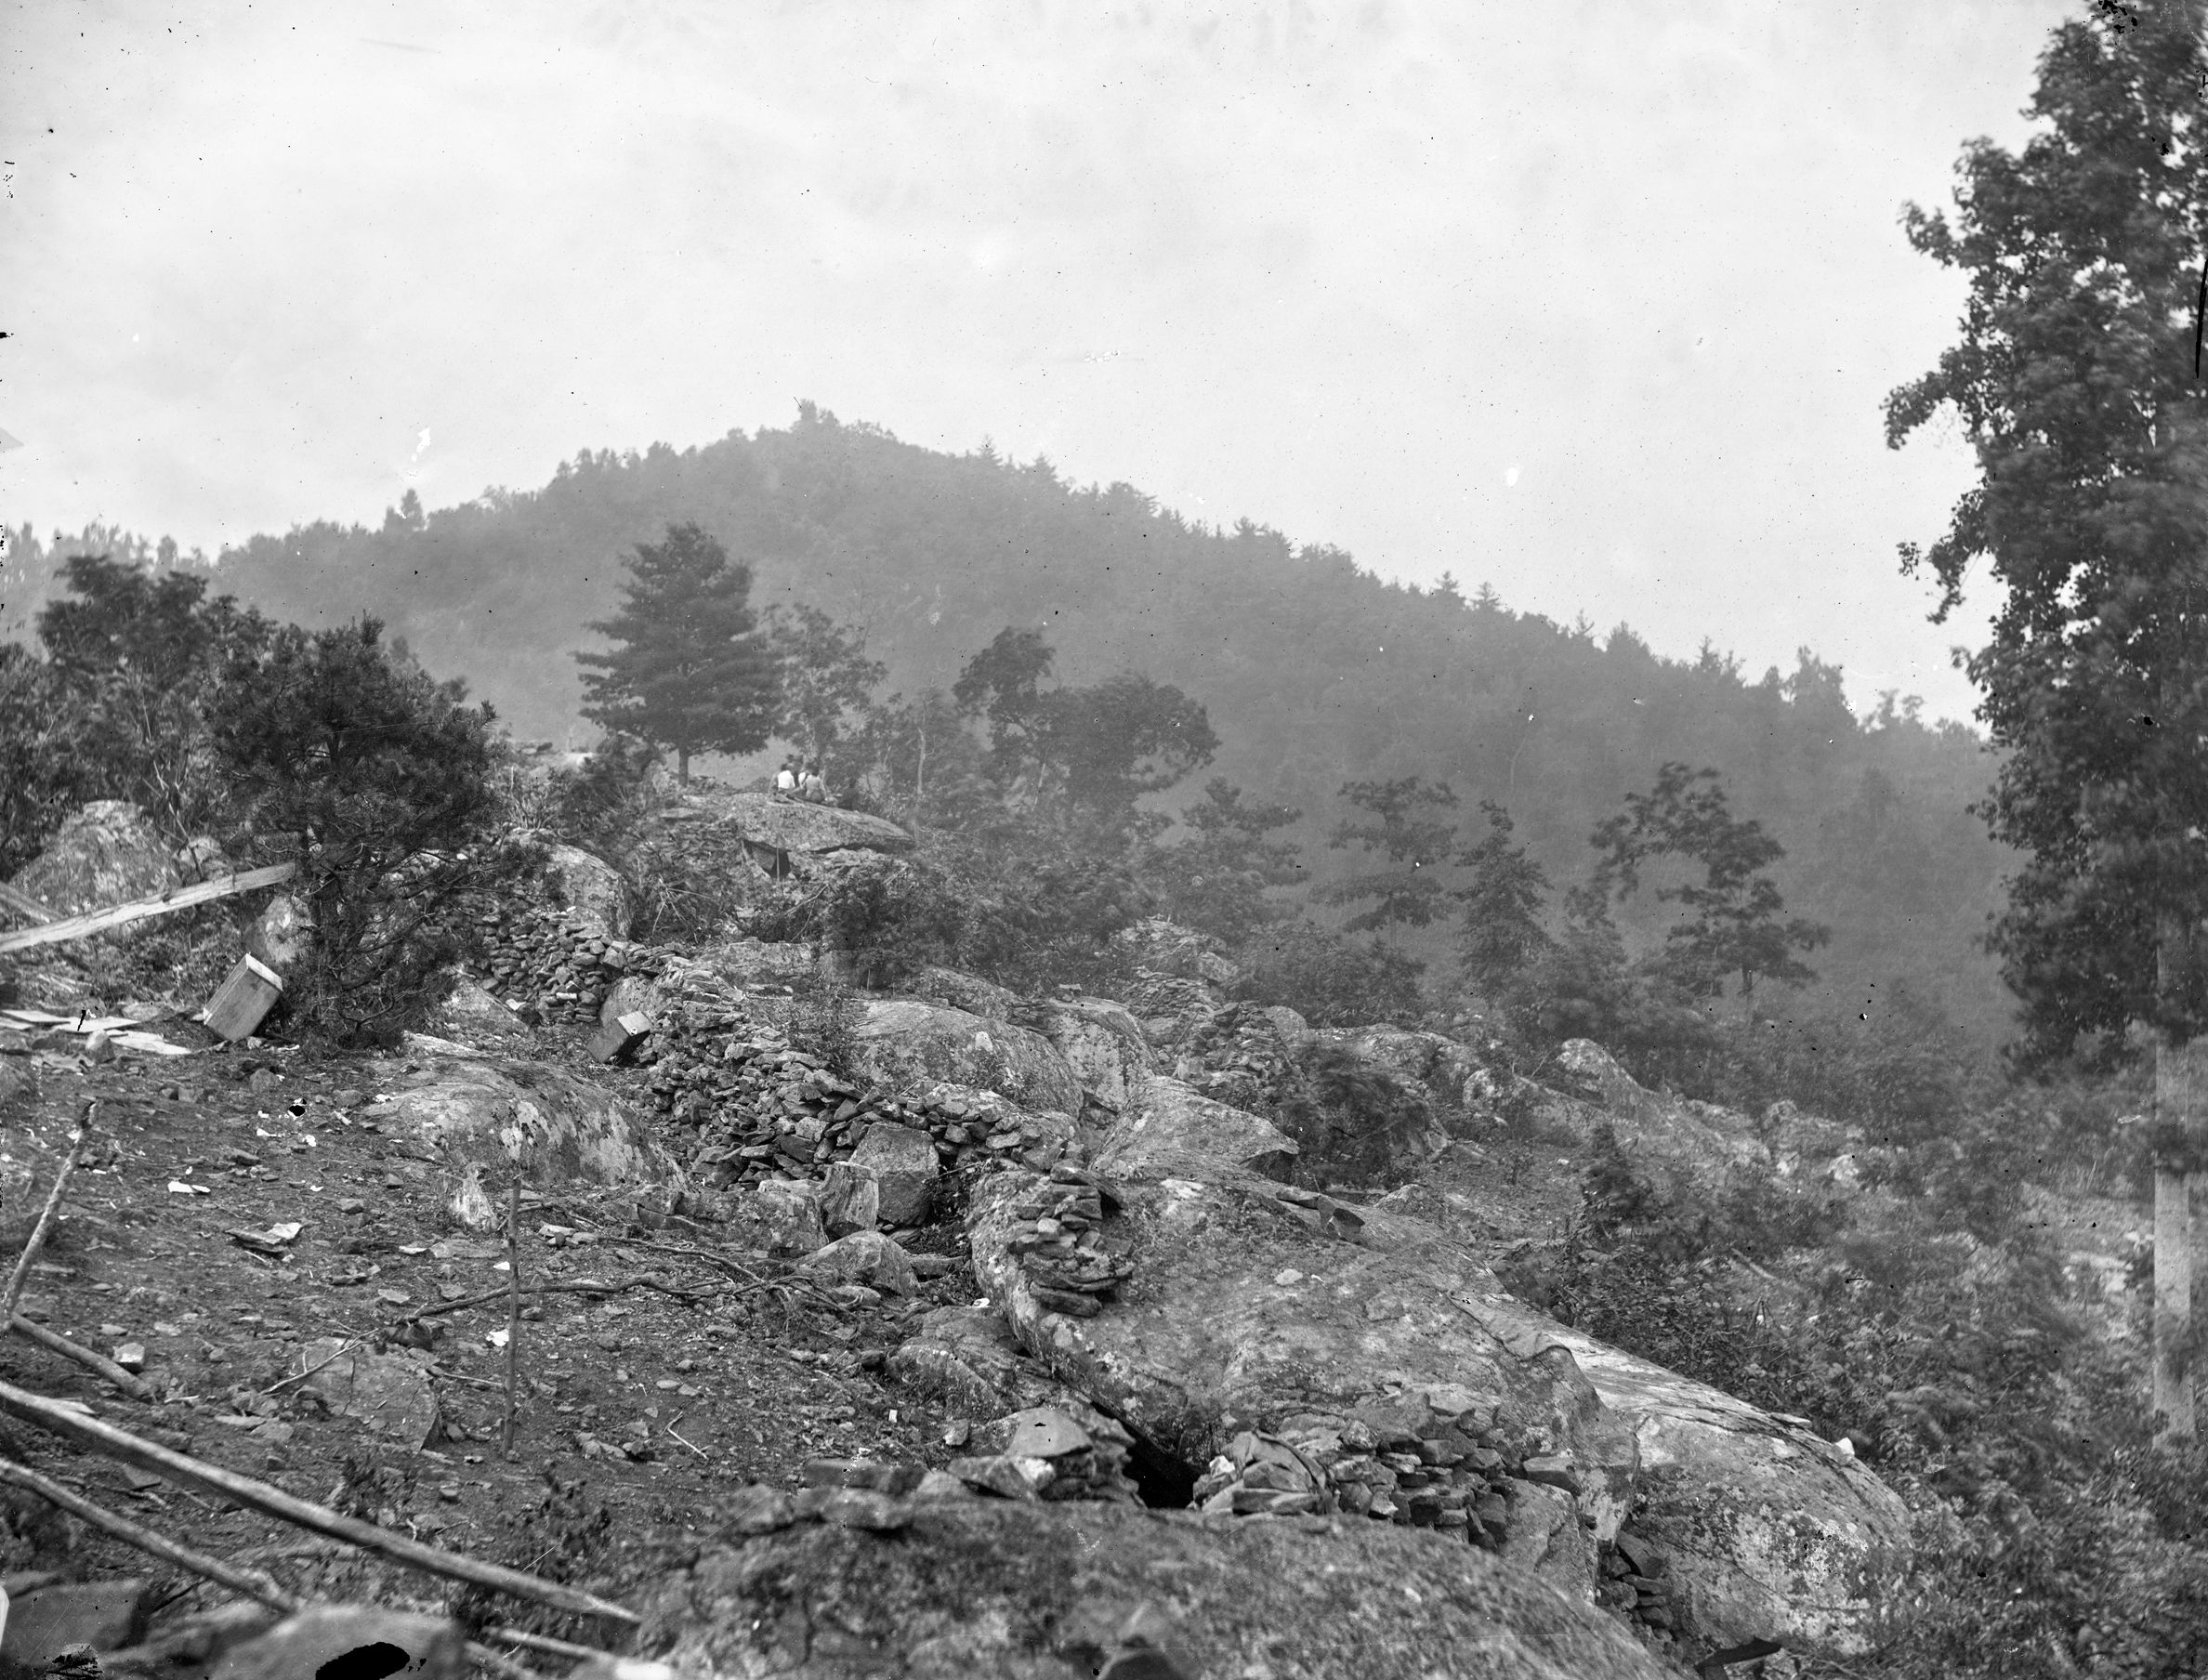 The hastily dug trenches and breastworks combined with natural rock formations at Little Round Top made a daunting obstacle for Col. Oates’s 15th and 47th Alabama regiments